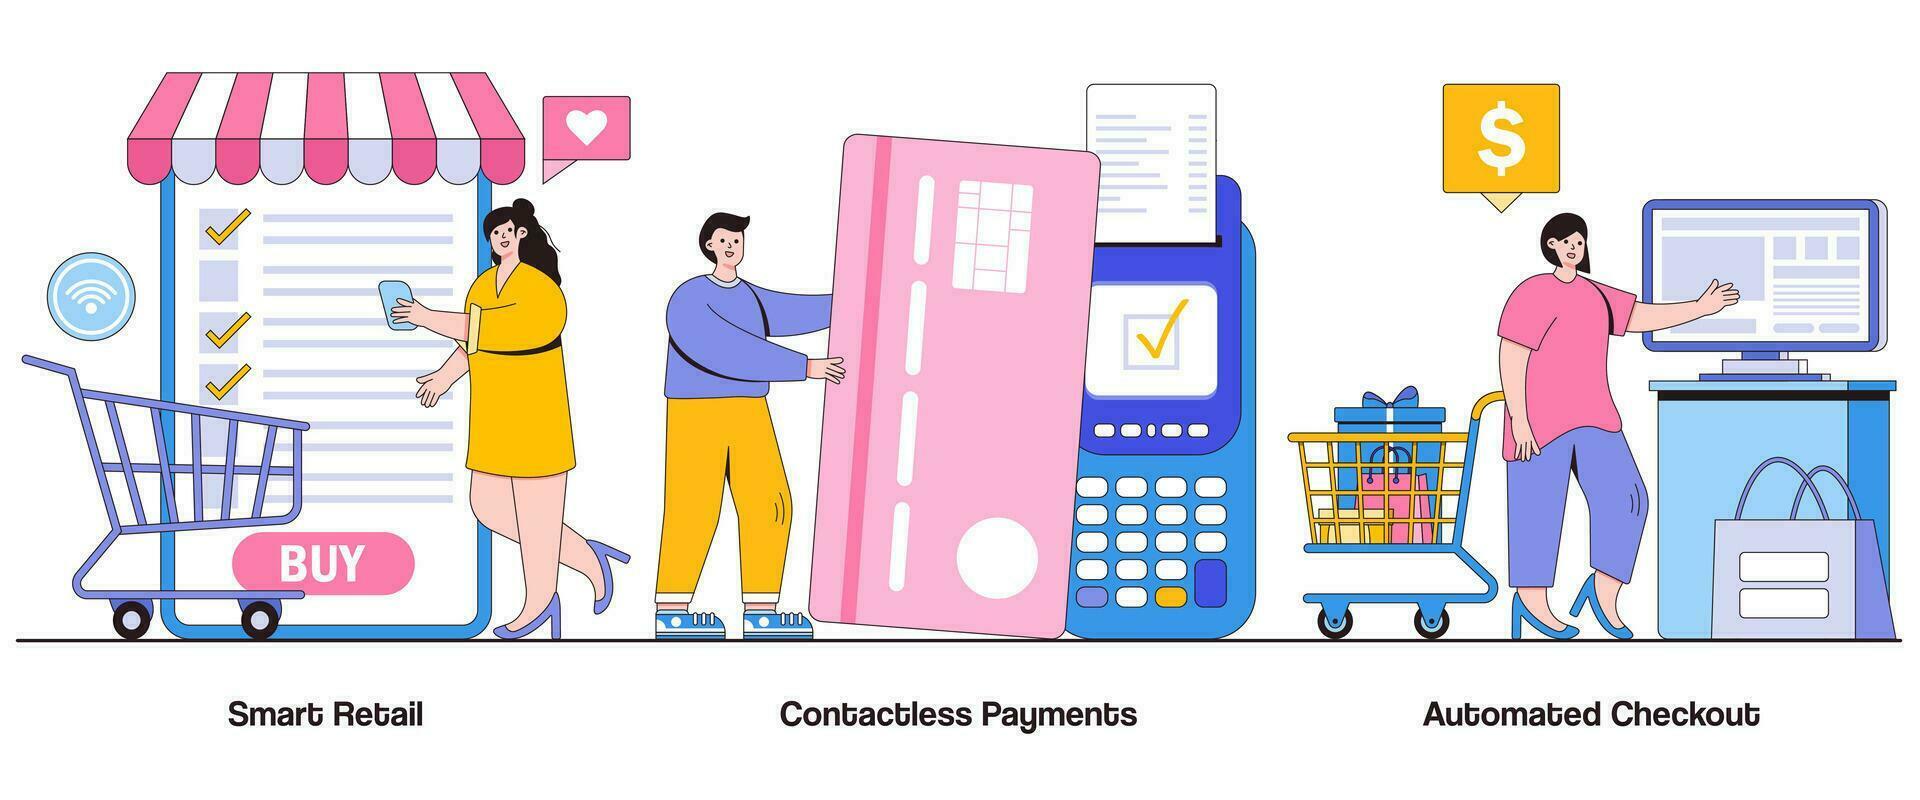 Smart Retail, Contactless Payments, Automated Checkout Concept with Character. Digital Shopping Experience Abstract Vector Illustration Set. Convenience, Seamless Transactions Metaphor